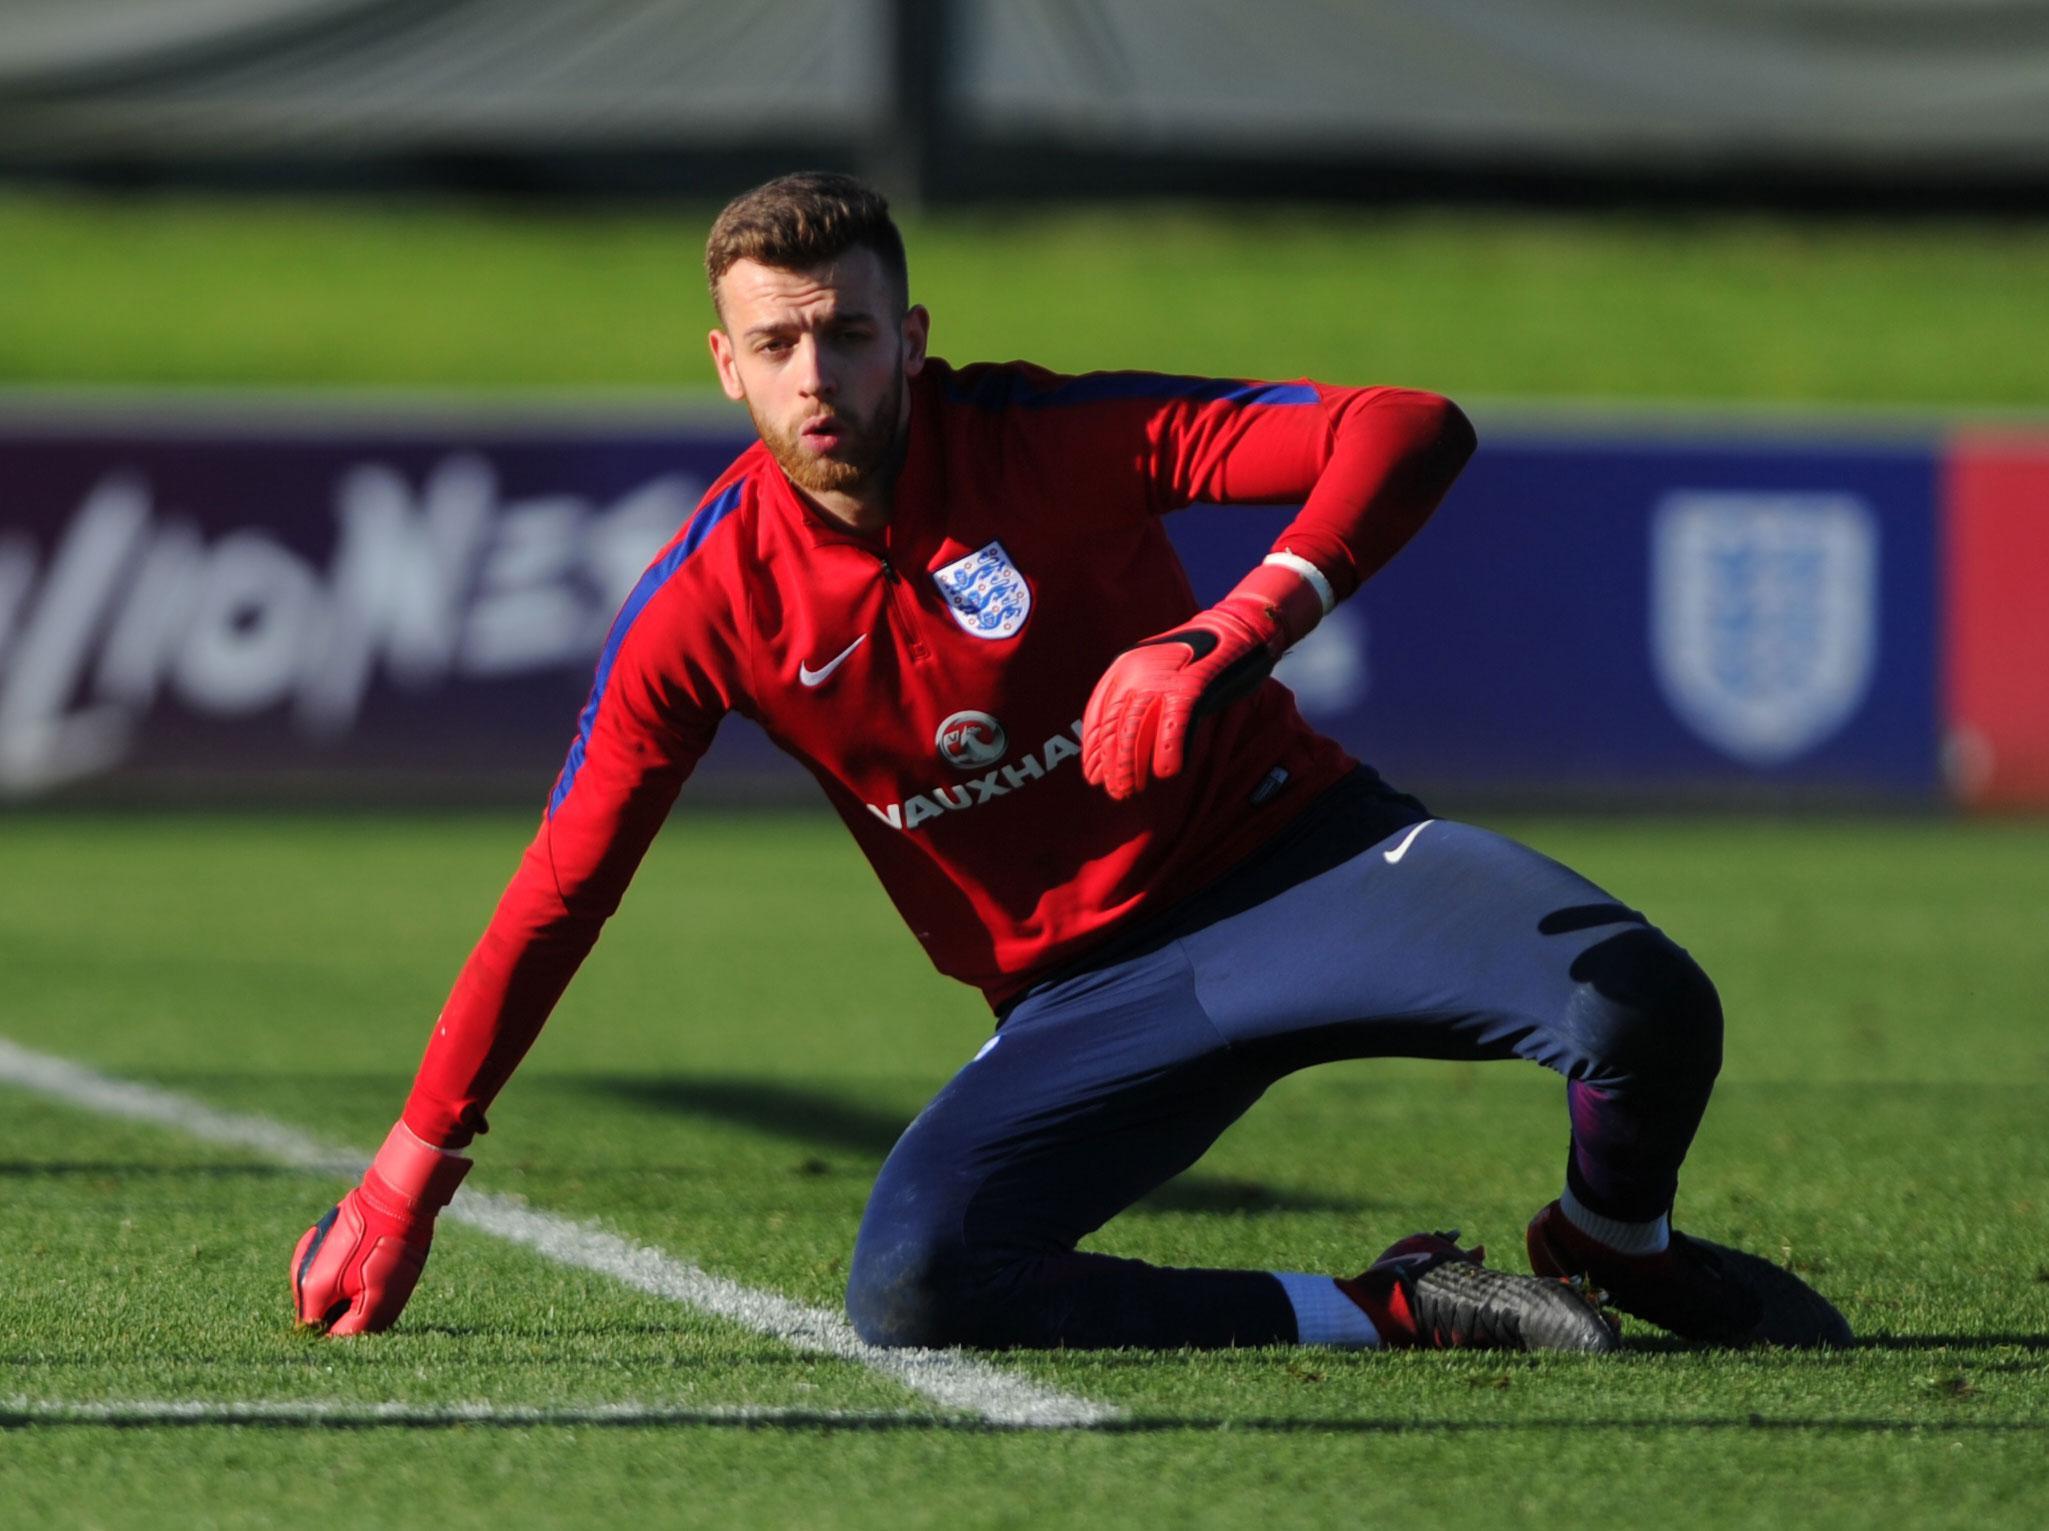 Angus Gunn has been called up to the England squad to replace the injured Jack Butland